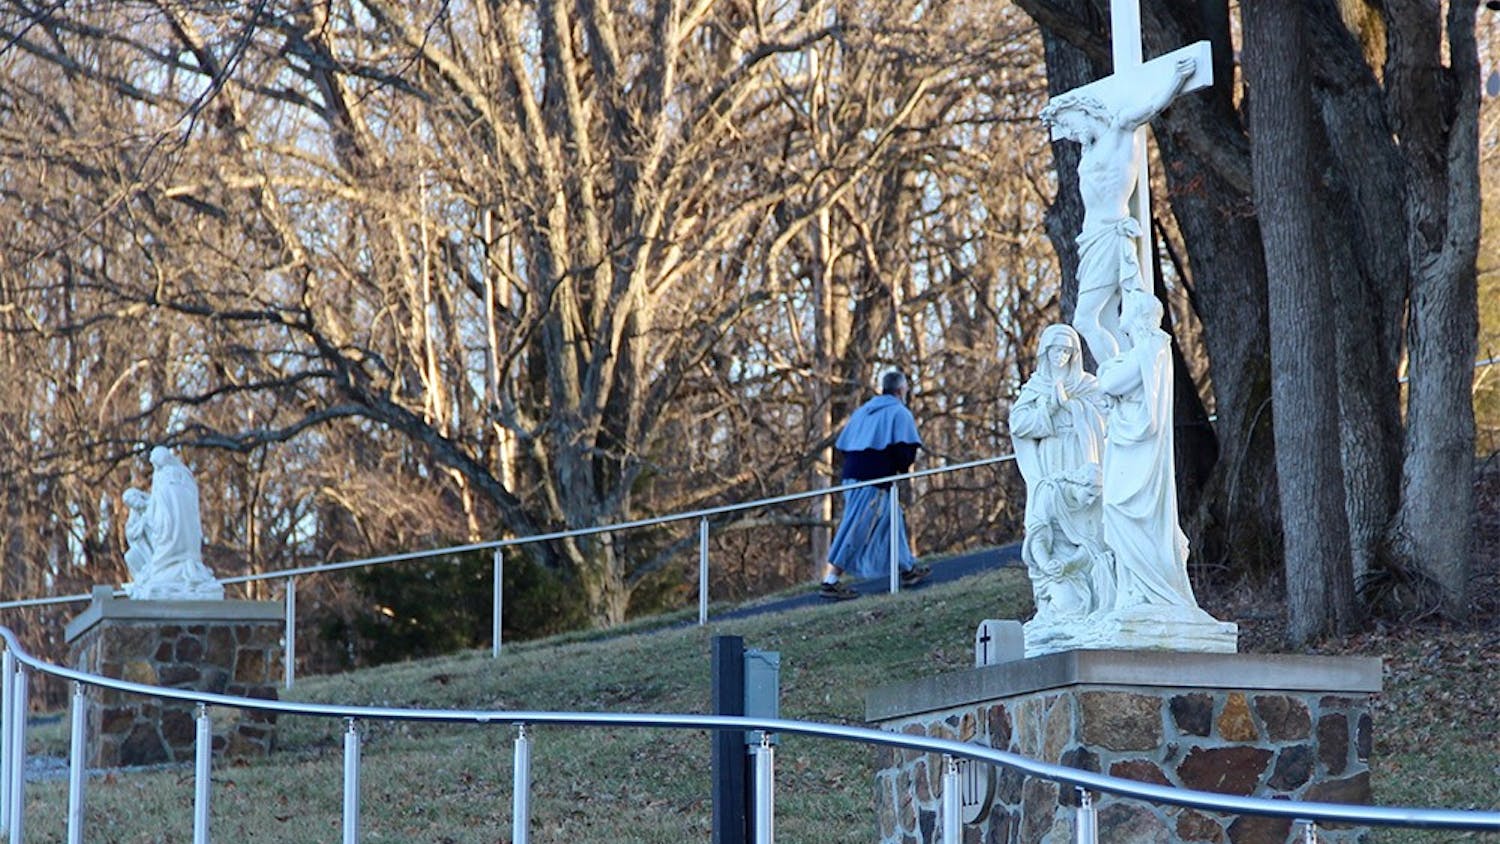 Father Elias Mary Millswalks the stations of the cross at the Mother of the Redeemer Retreat Center. Milswalks lives at the Mother of the Redeemer Retreat Center on Bloomington's west side, where he leads mass and various processionals around the property's prayer paths. The Mother of the Redeemer Retreat Center is considered "holy" ground on Bloomington's west side. 